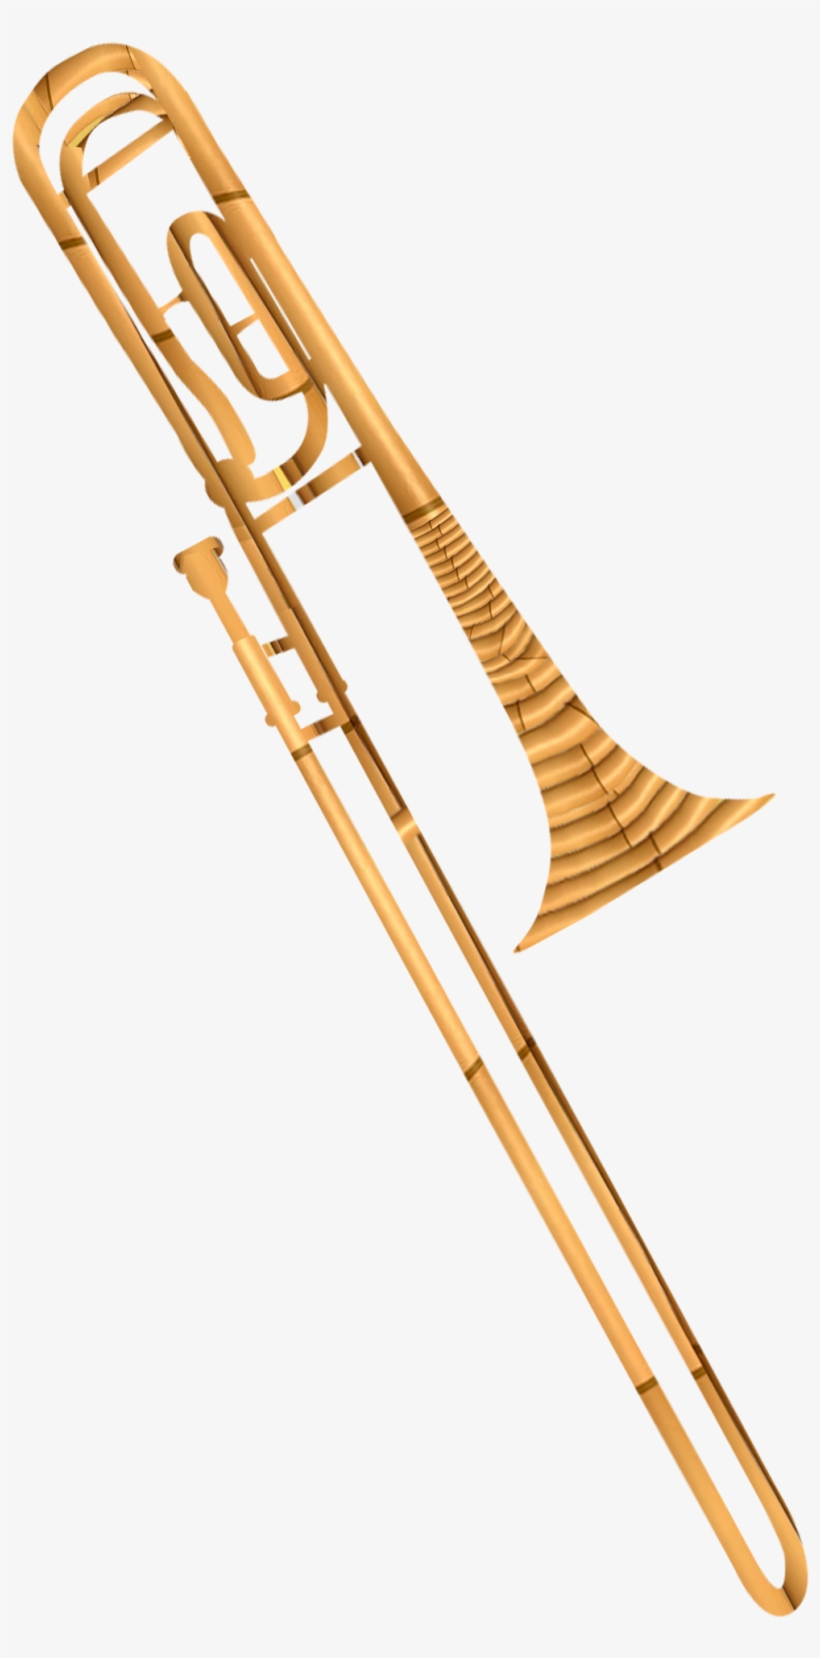 A Brass Instrument Consisting Of A Long Cylindrical - Elkhart 100tbb Bass Trombone, transparent png #760866